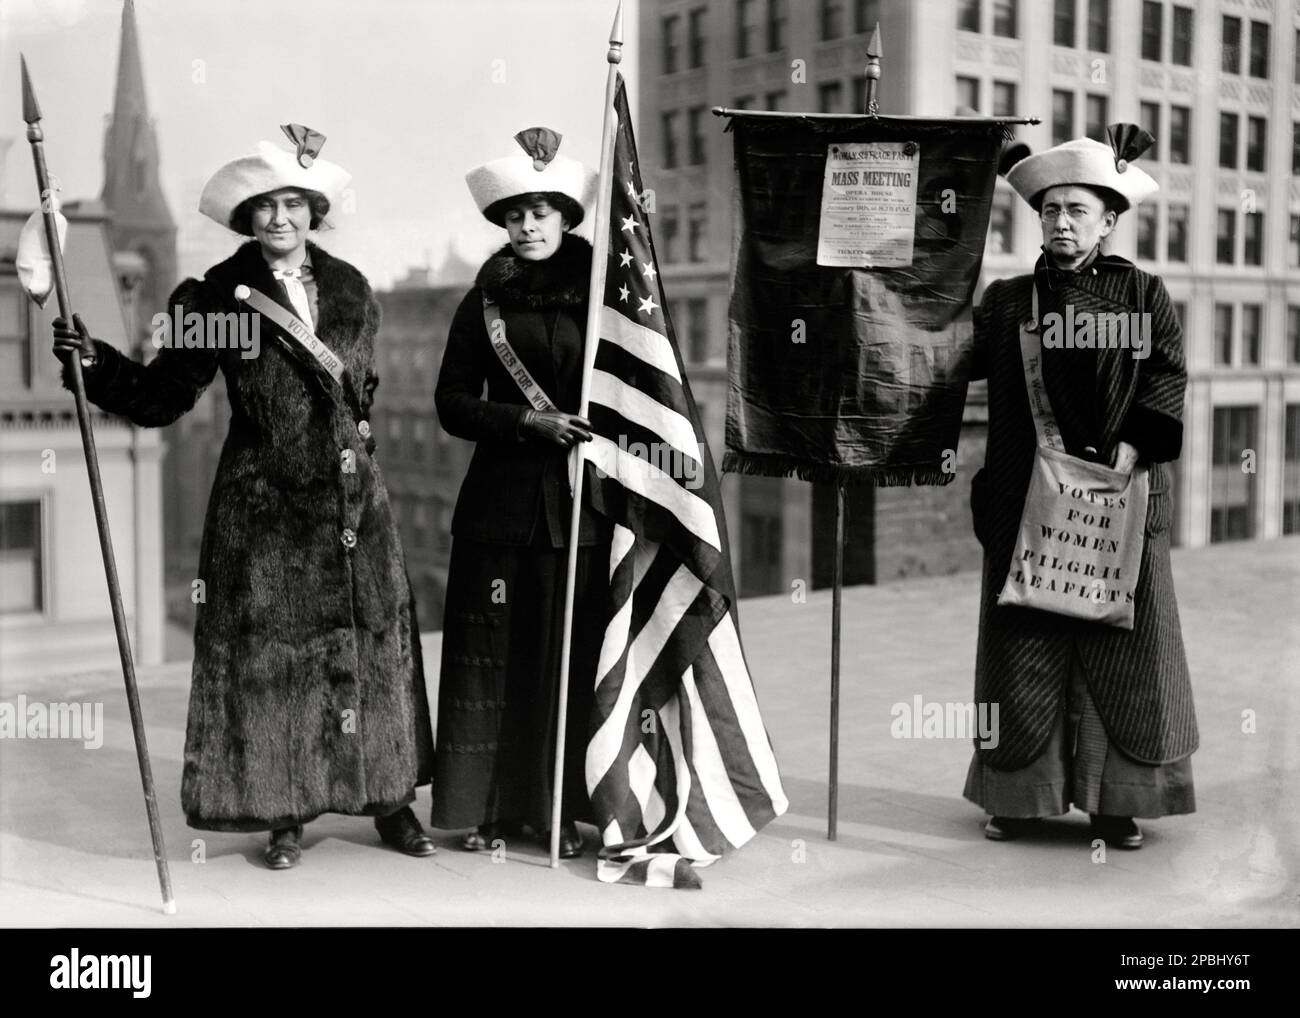 1915 ca , New York , USA :  Photo shows women suffrage hikers General Rosalie Jones, Jessie Stubbs, and Colonel Ida Craft, who is wearing a bag labeled ' Votes for Women pilgrim leaflets' and carrying a banner with a notice for a ' Woman Suffrage Party . Mass meeting. Opera House. Brooklyn Academy of Music. January 9th at 8:15 p.m. ' with speakers Rev. Anna Shaw, Mrs. Carrie Chapman Catt, and Max Eastman - SUFFRAGETTA - sufraggetta - Sufragist - POLITICO - POLITICIAN - POLITICA - POLITIC - FEMMINISMO - FEMMINISTA  - FEMMINISTE - SUFFRAGETTE - USA - ritratto - portrait   - UNITED STATES  FLAG - Stock Photo